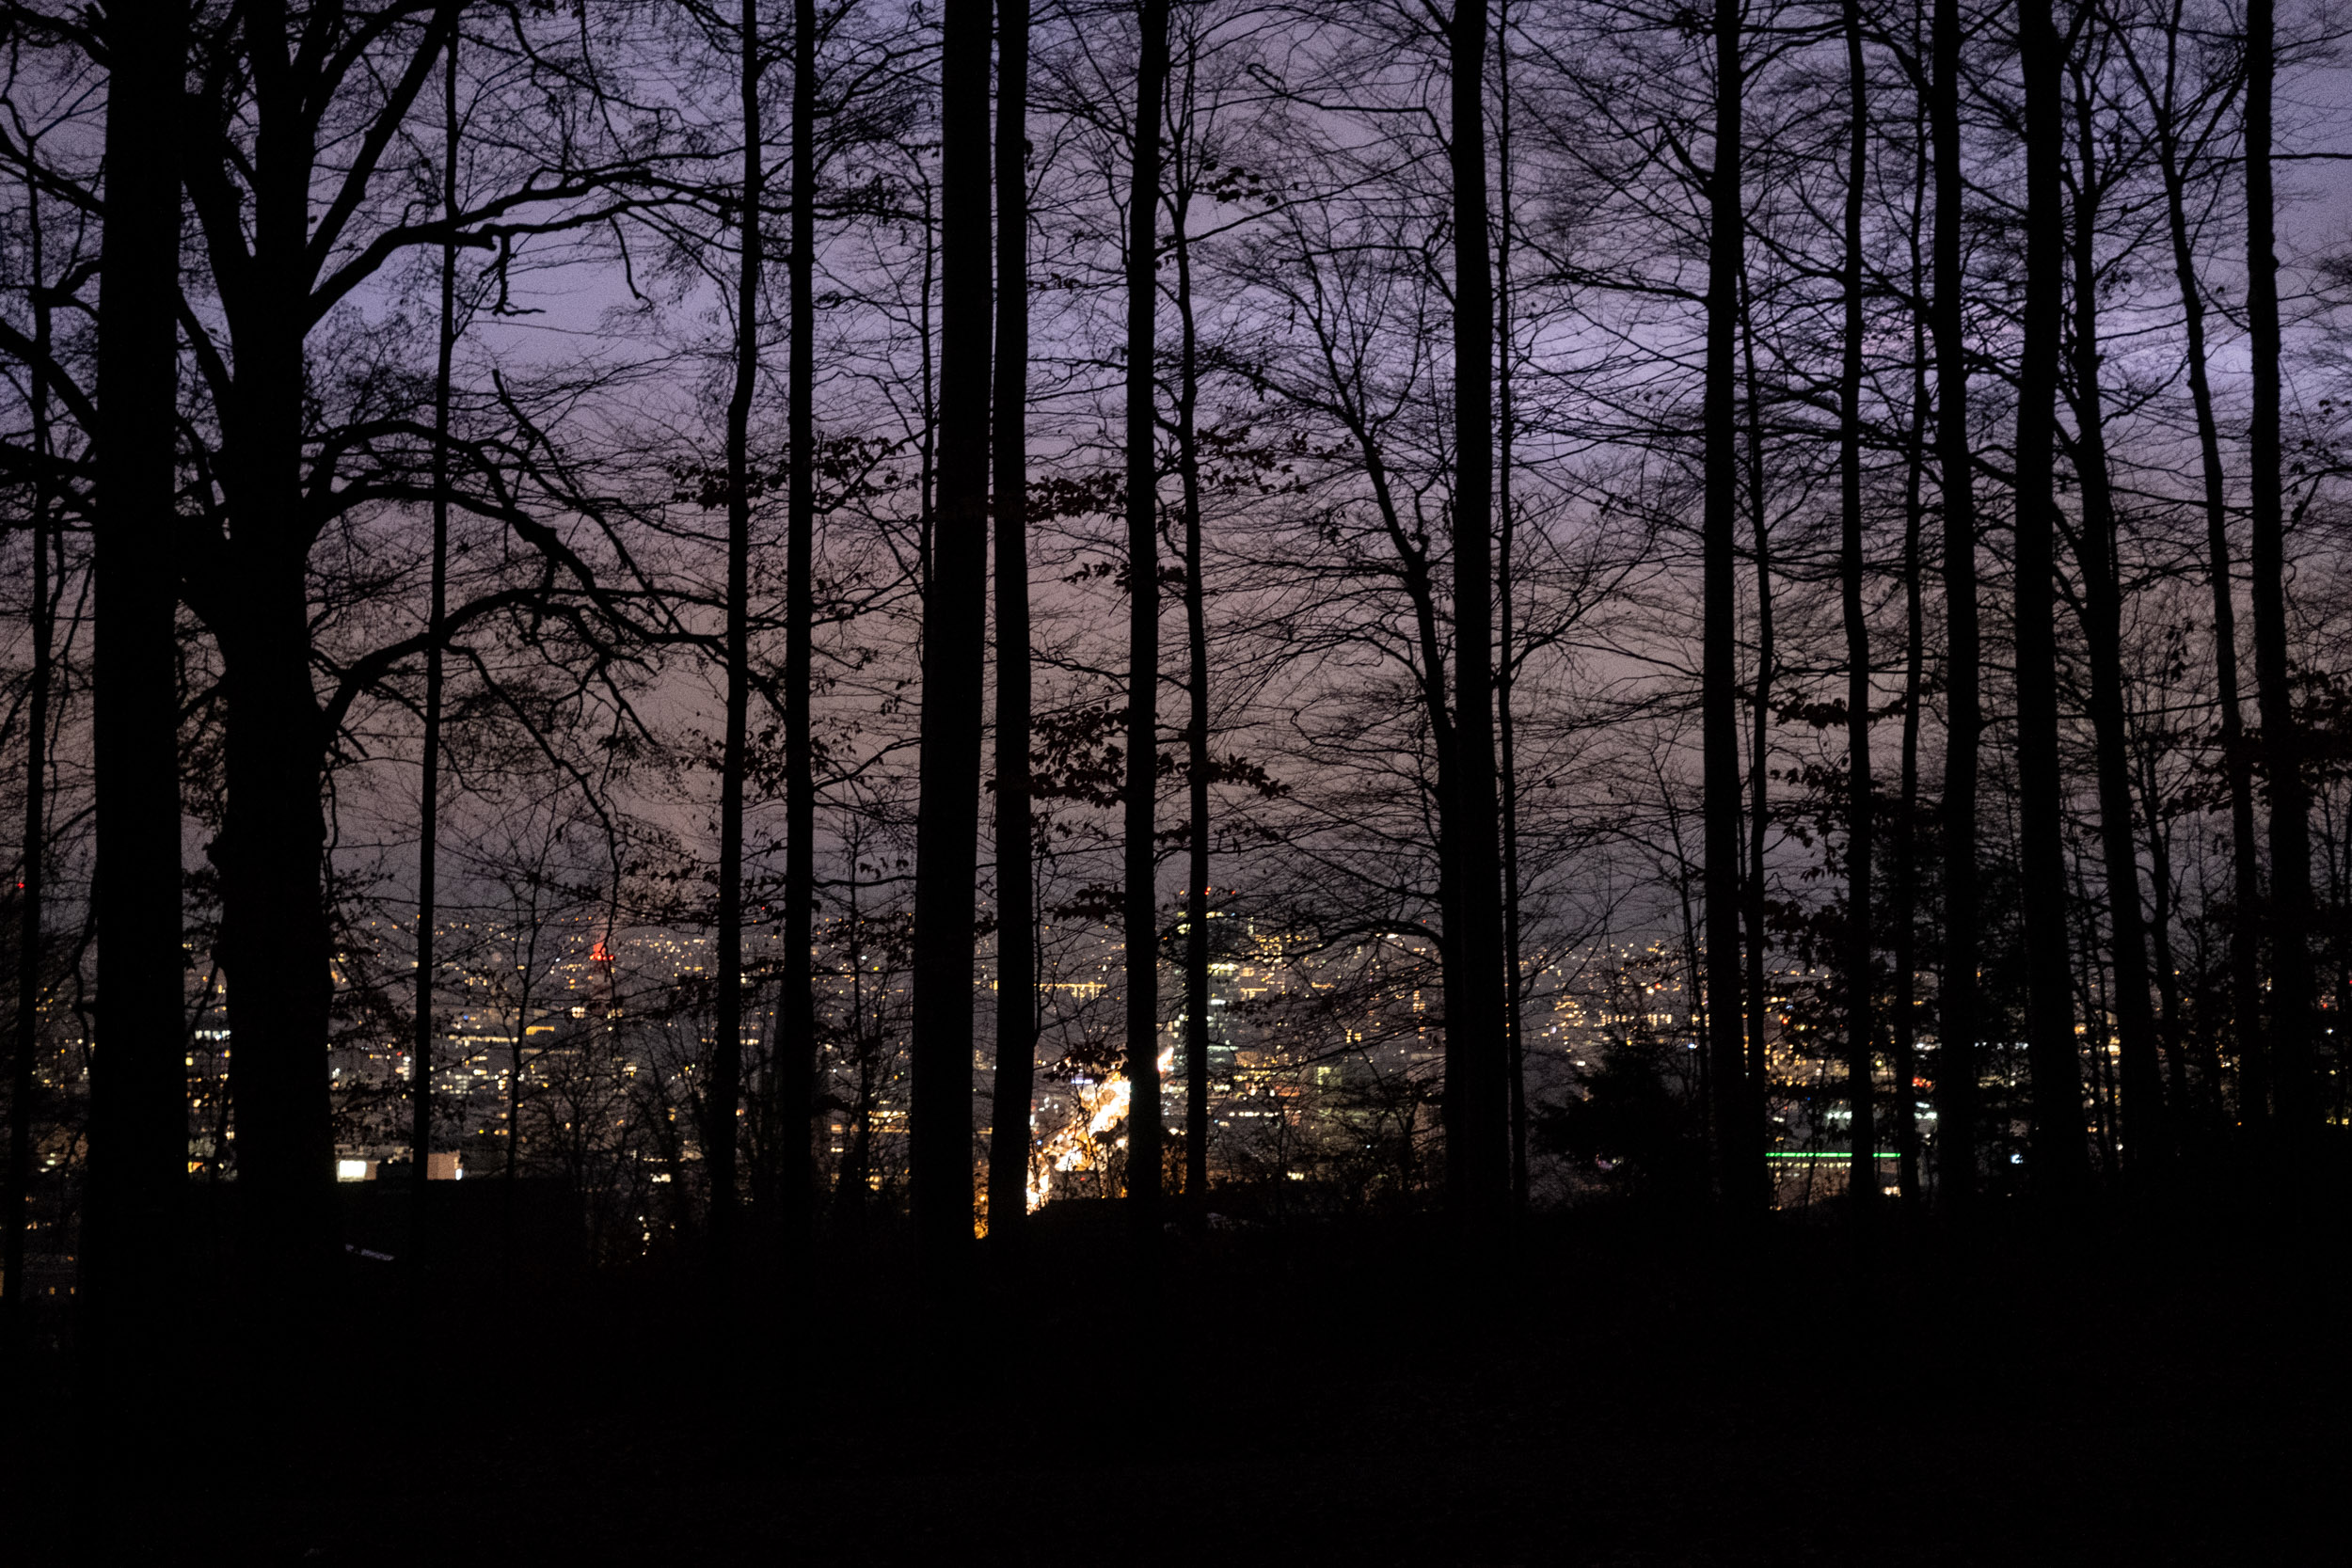 View of Zurich through some trees, just after dusk.